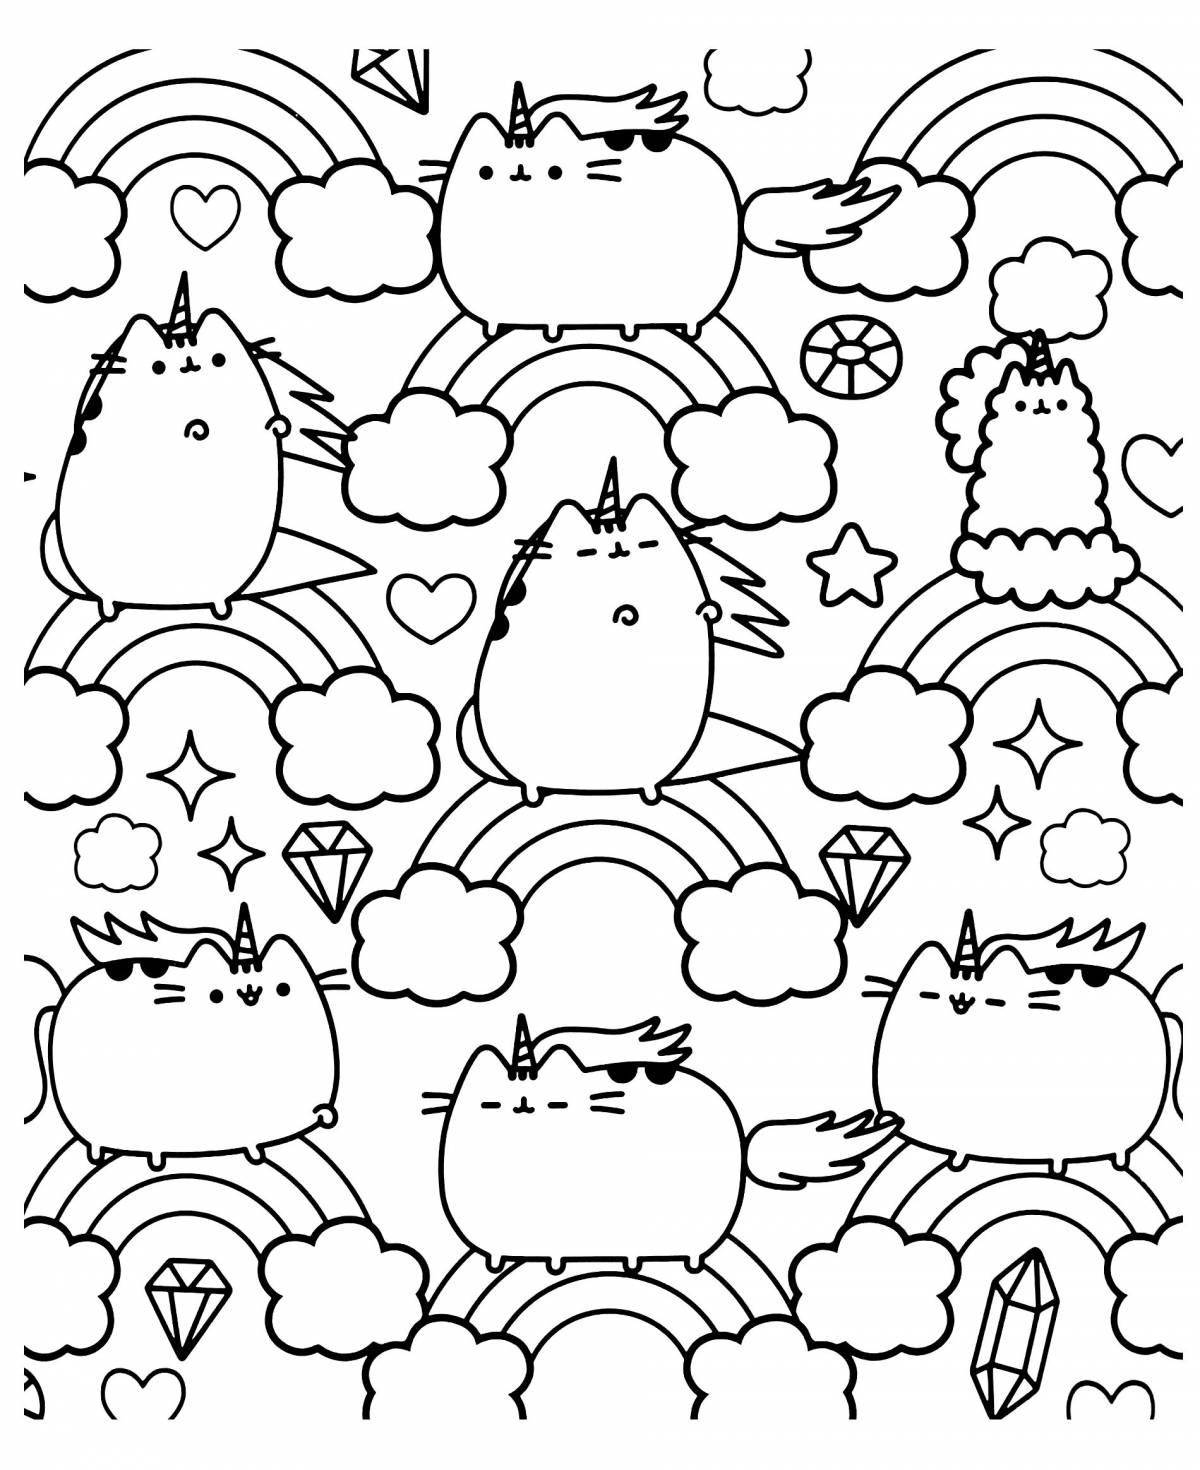 Colouring page adorable pusheen cat